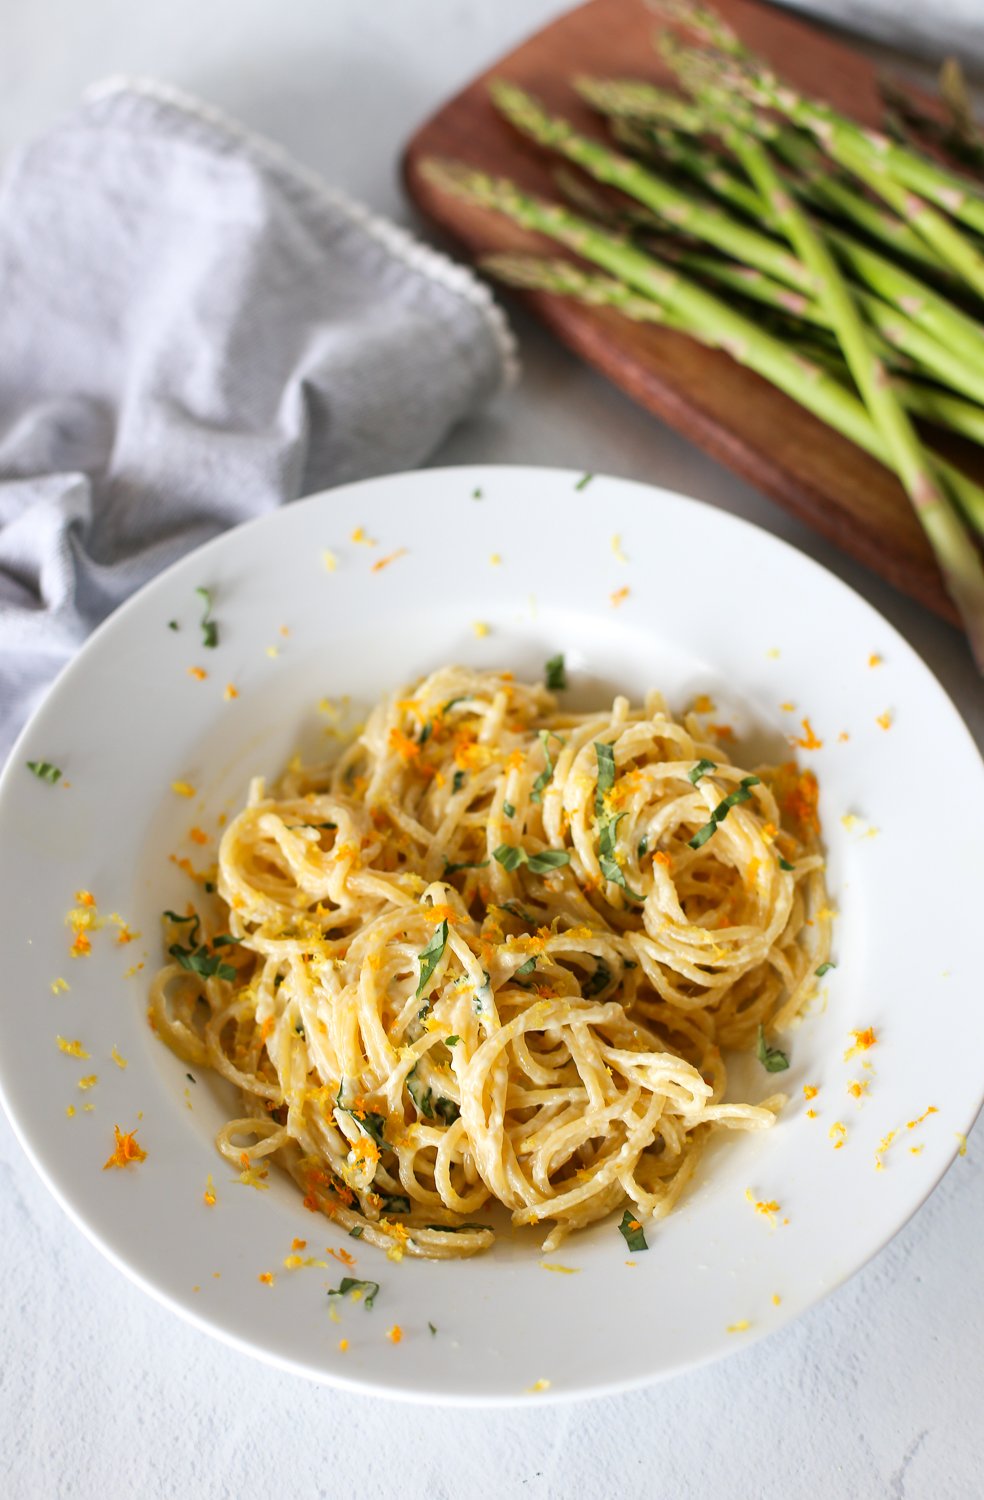 Creamy lemon pasta sauce in a white bowl with asparagus in the background.